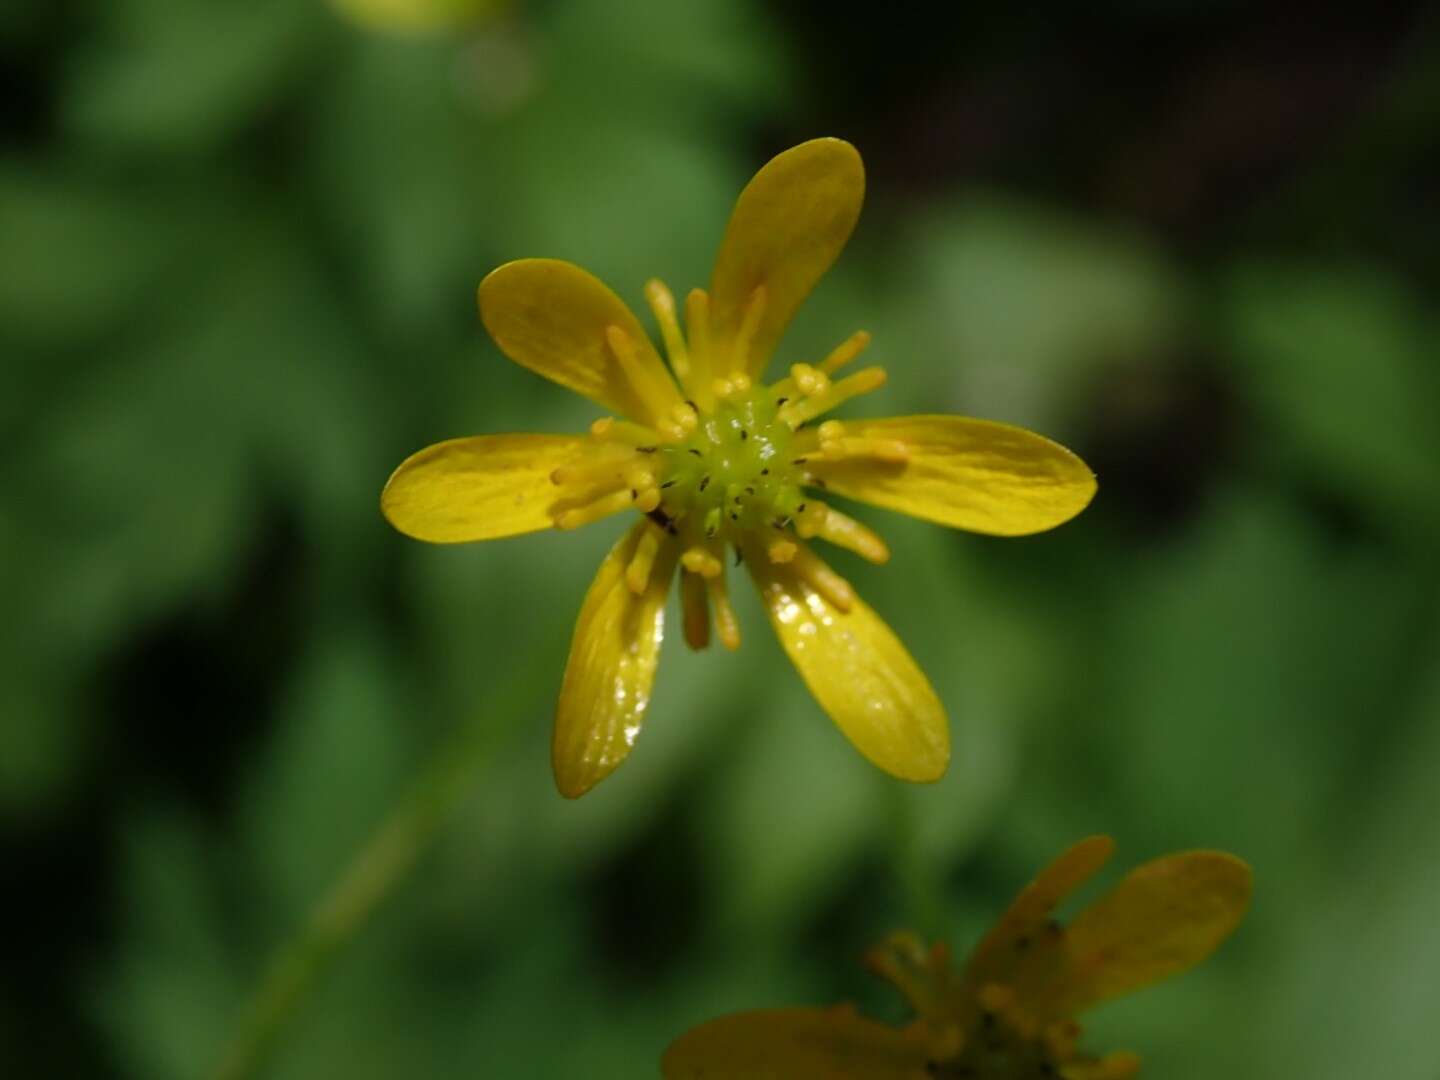 Image of waterplantain buttercup